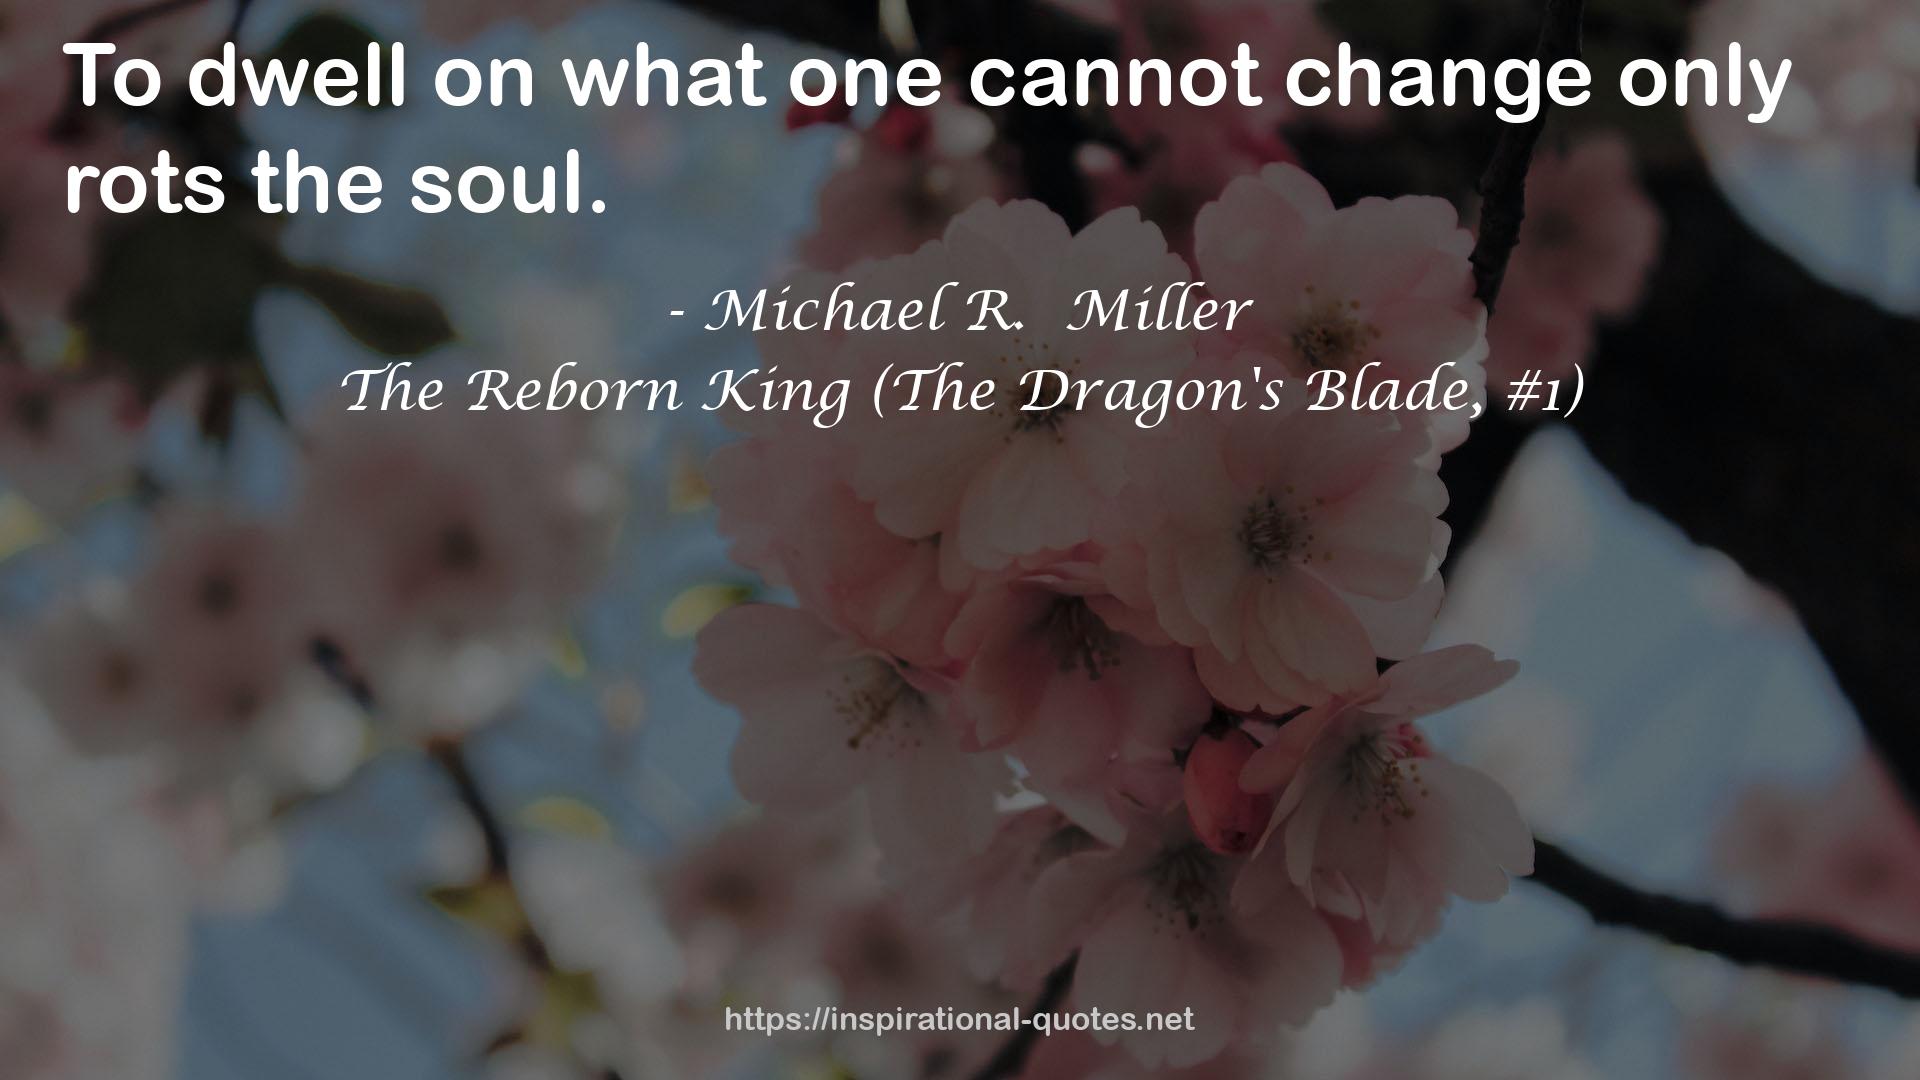 The Reborn King (The Dragon's Blade, #1) QUOTES